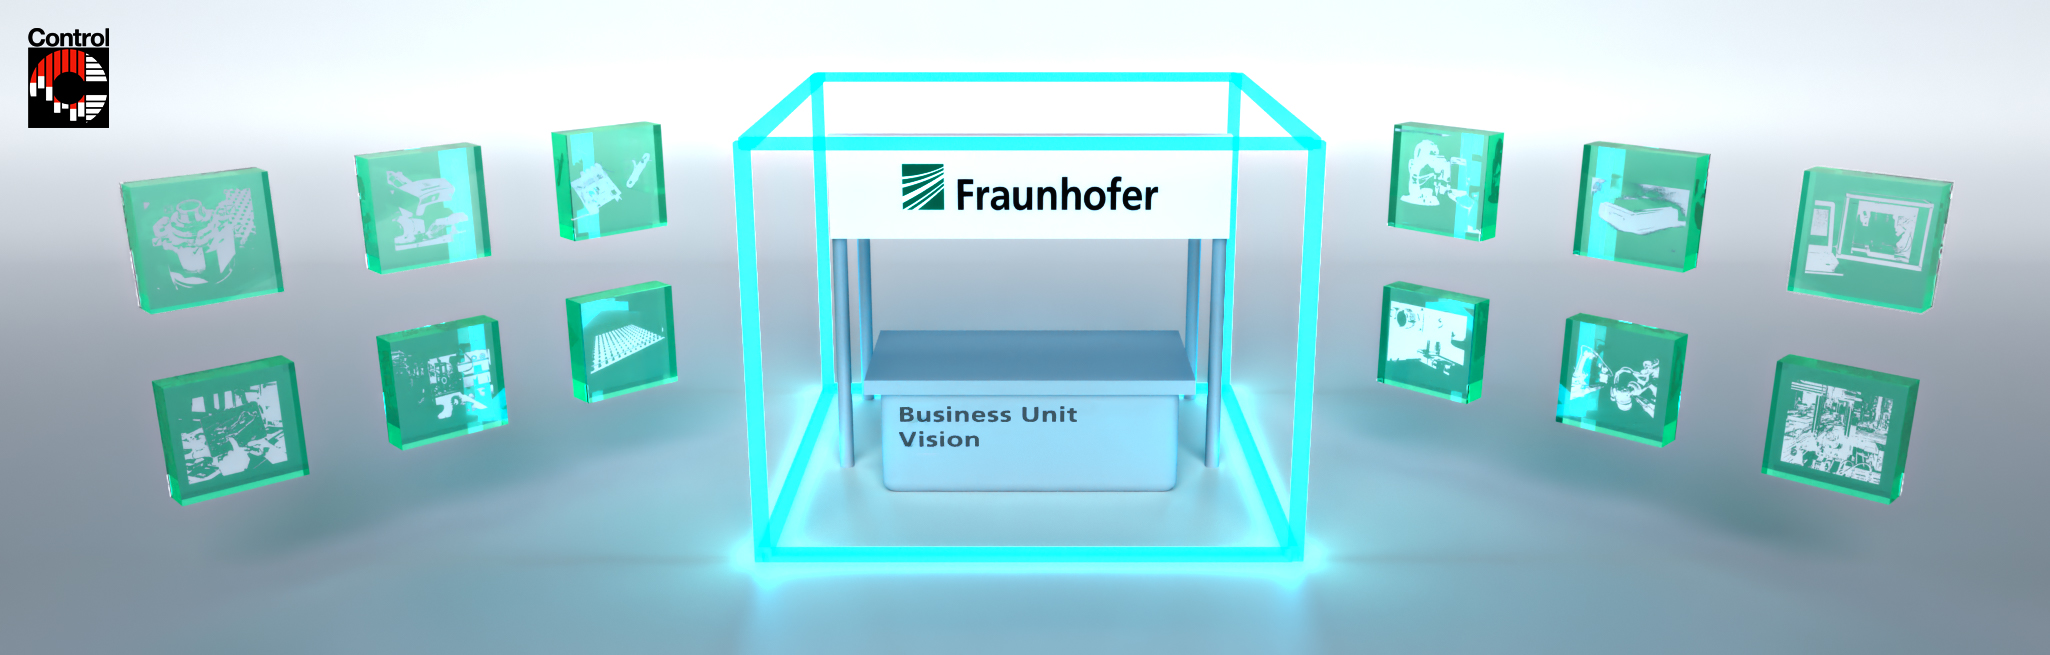 Fraunhofer Vision Business Unit at the Control Virtual 2021